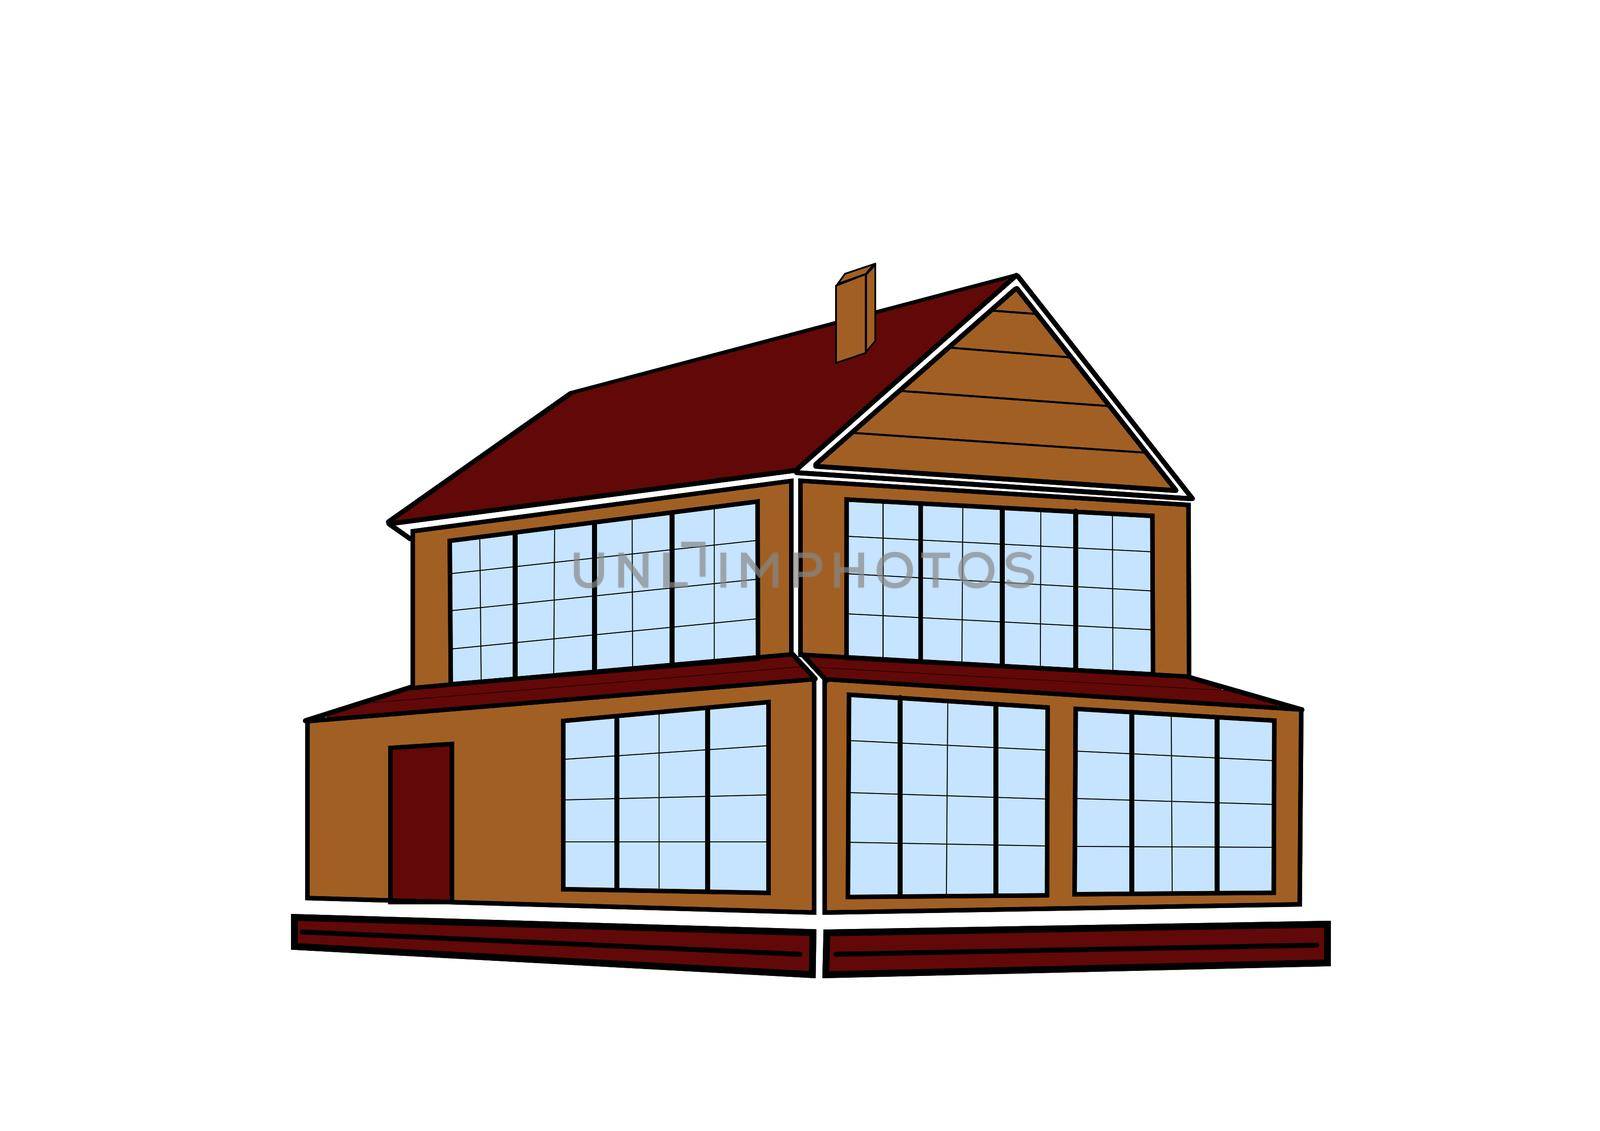 illustration of cool detailed red house icon isolated on white background.